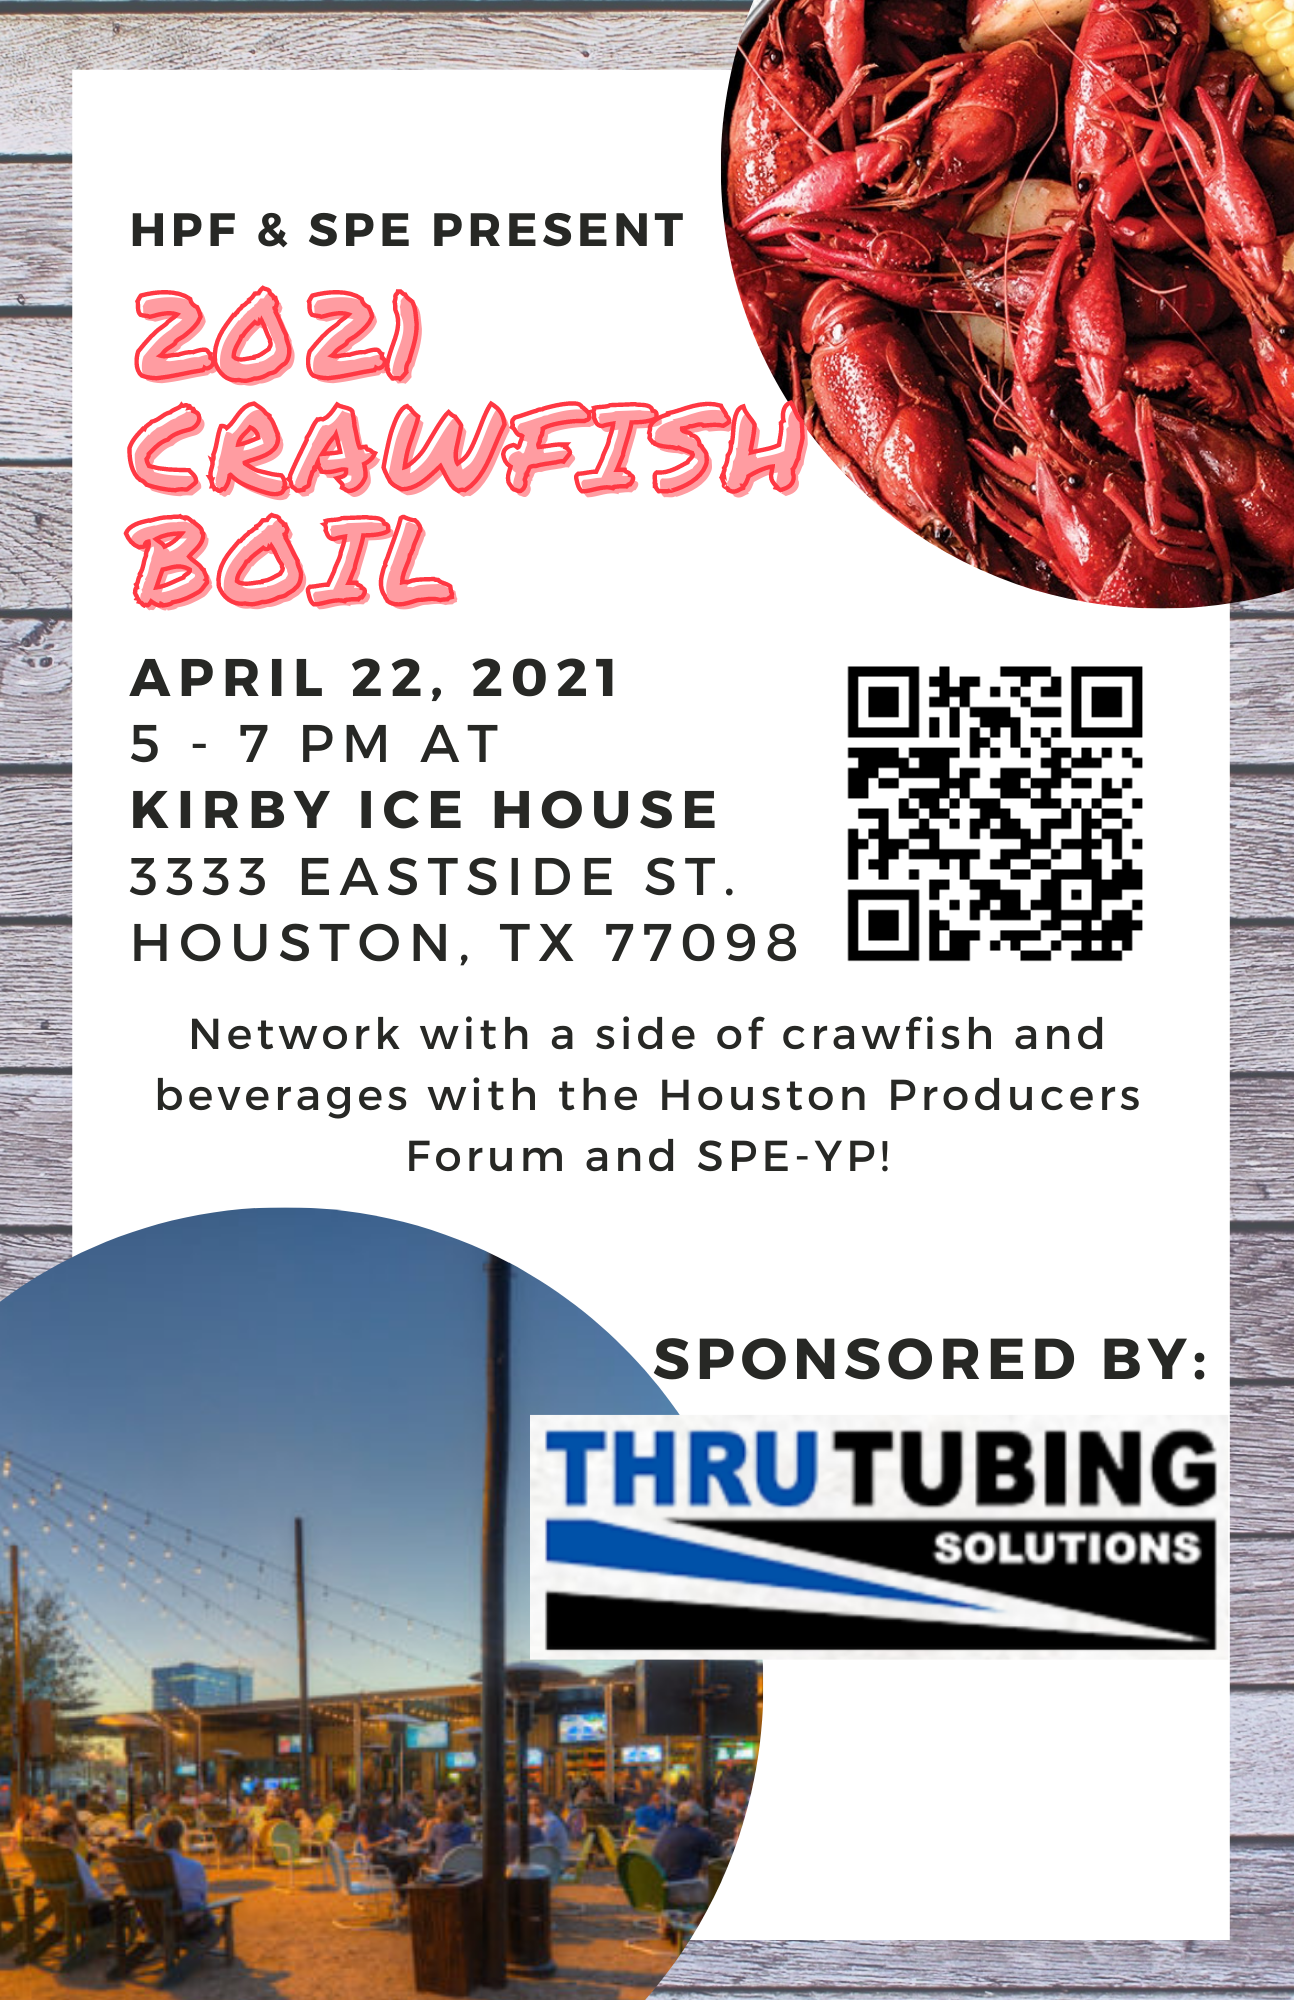 Event - 2021 Crawfish Boil - THRUTUBING SOLUTIONS Kirby Ice House